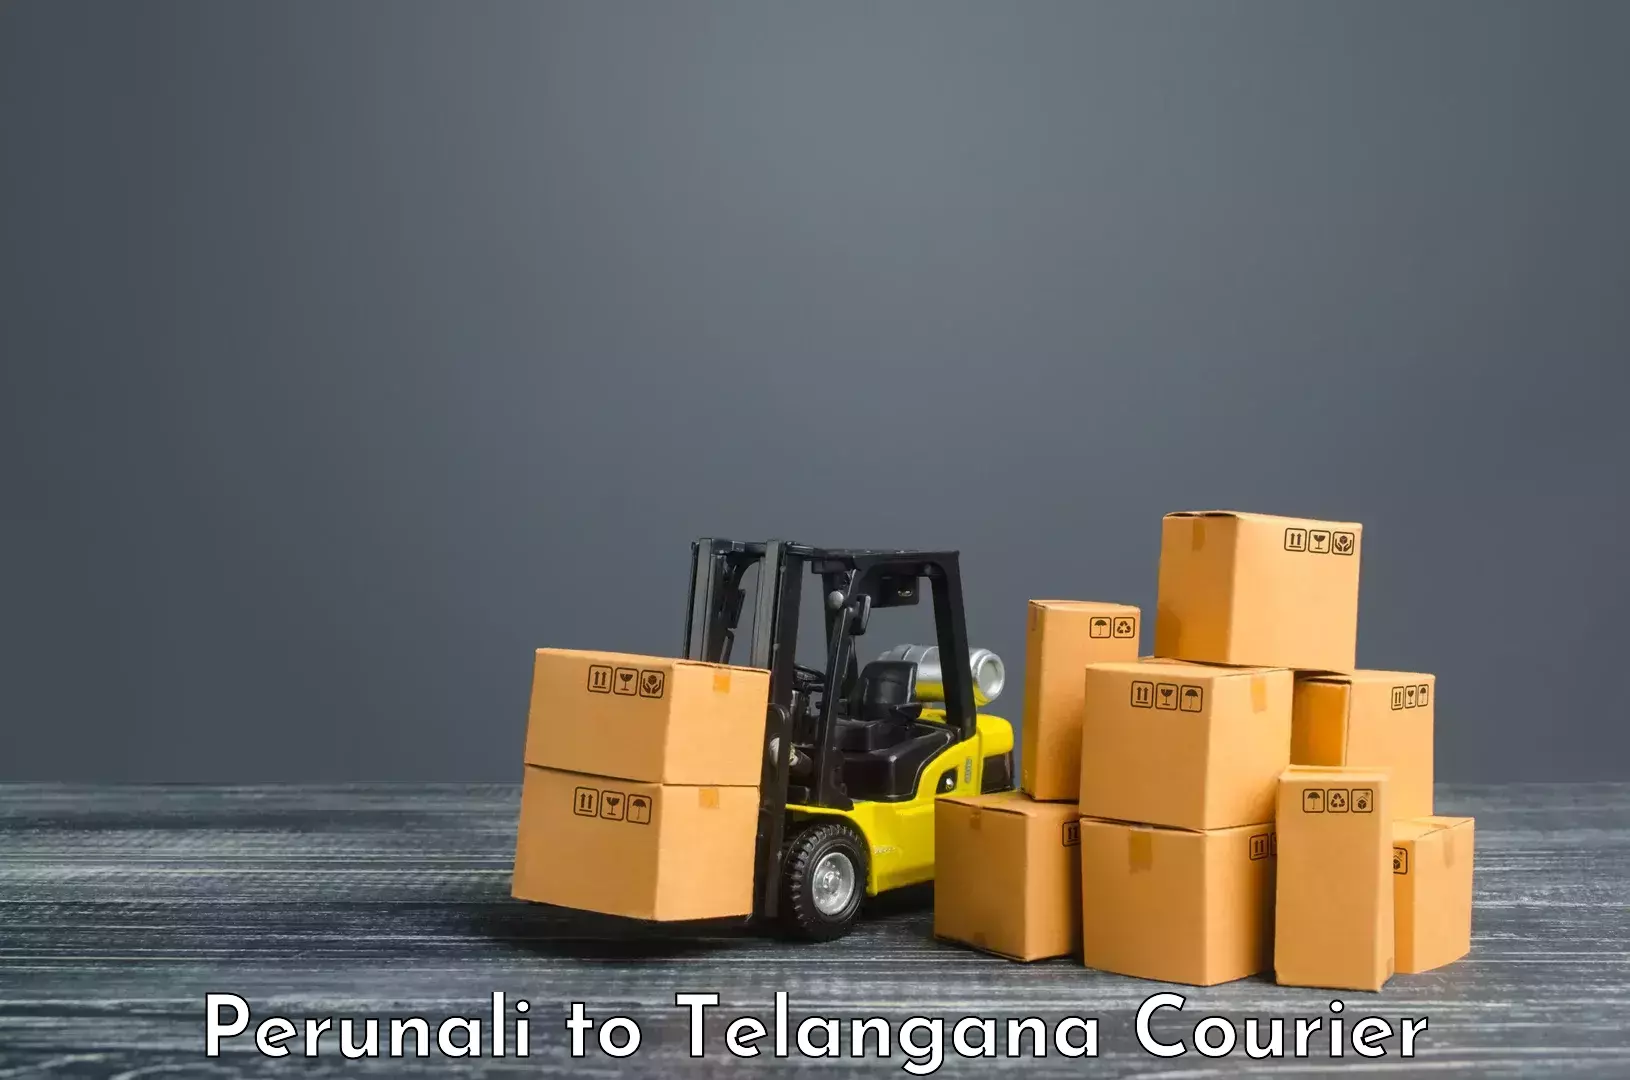 Efficient courier operations Perunali to Netrang